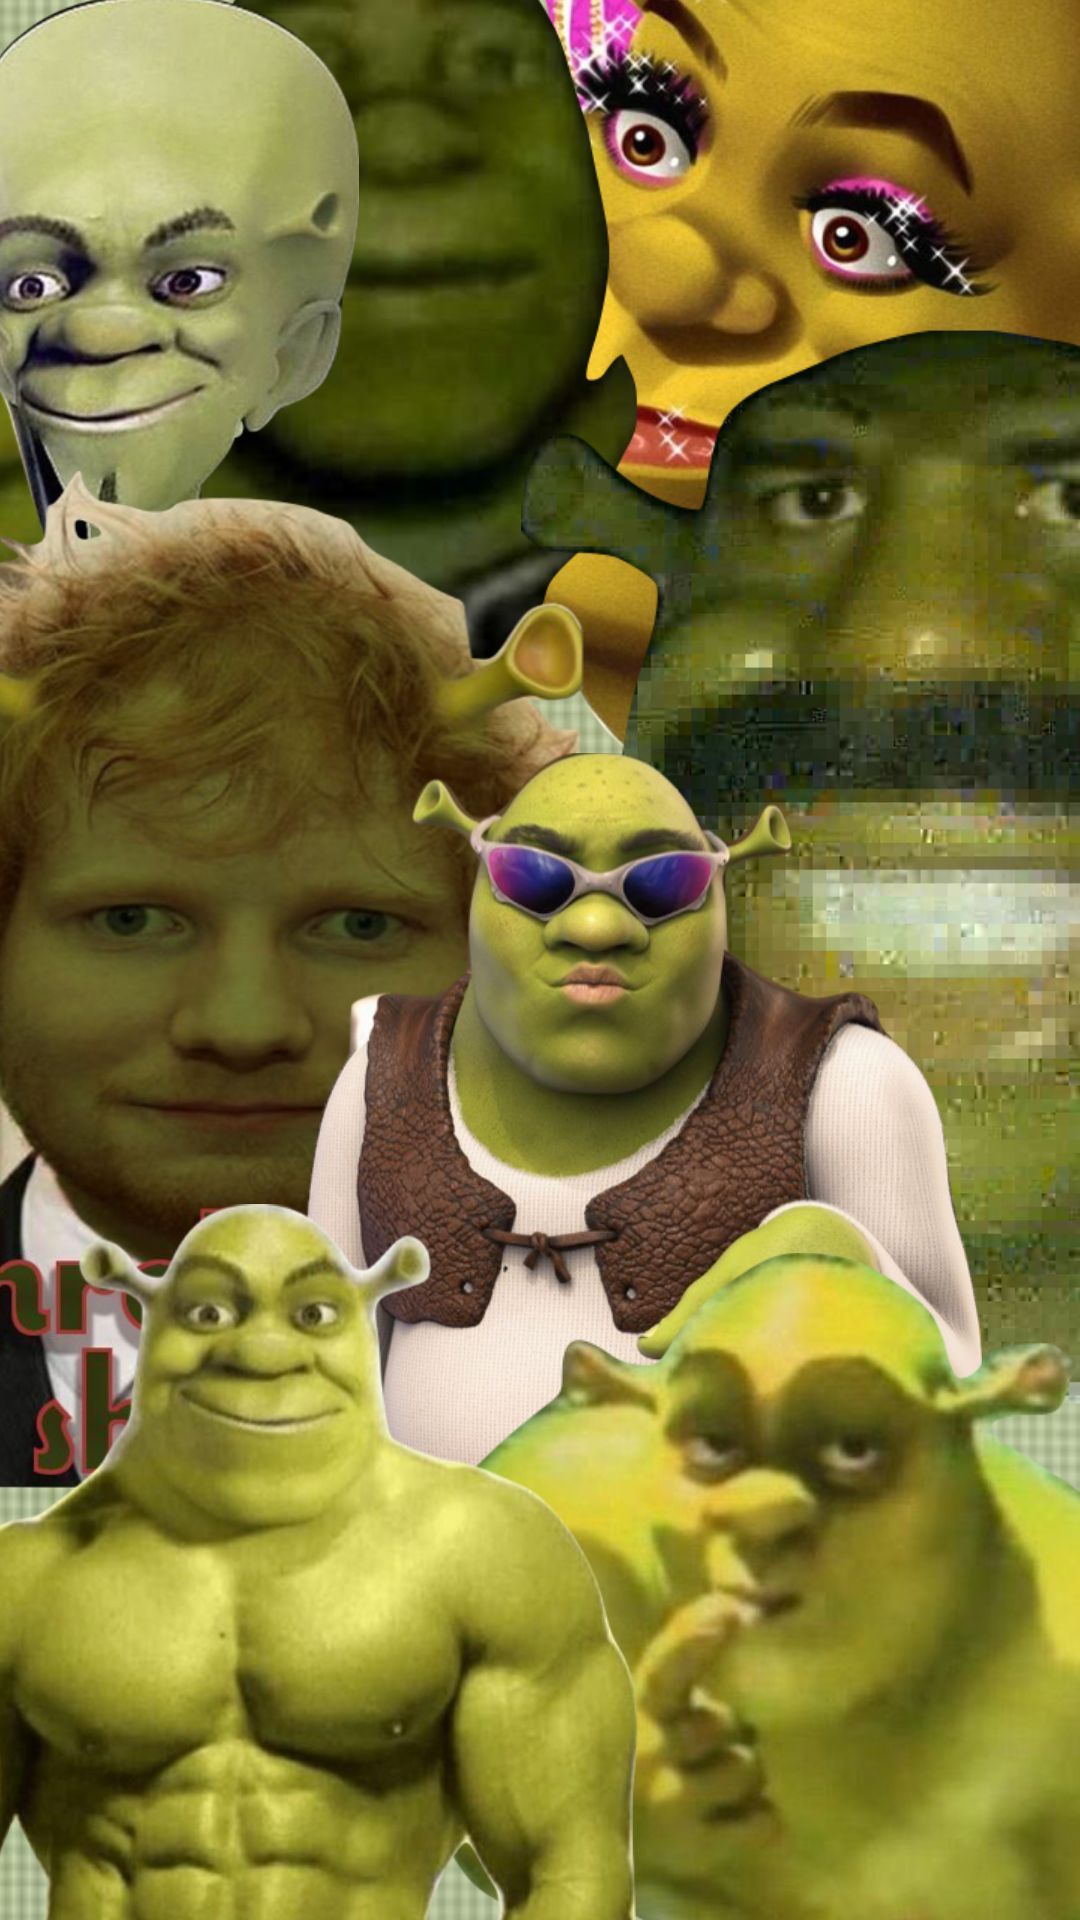 A collage of shrek characters with different facial expressions - Shrek